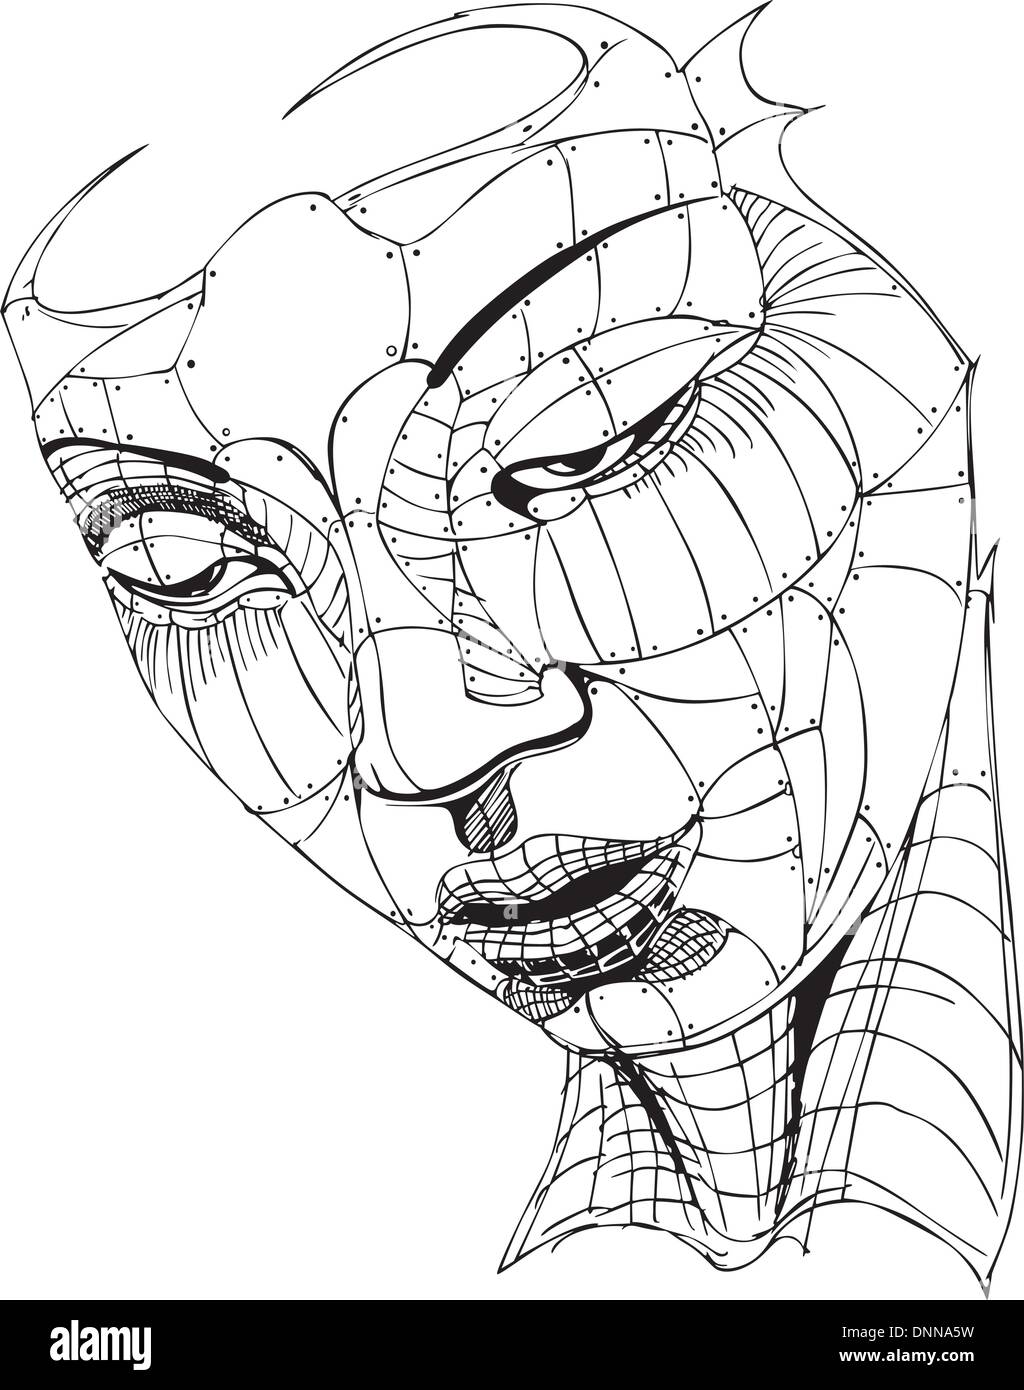 Wireframe Woman Face. Black and white vector illustration. Stock Vector